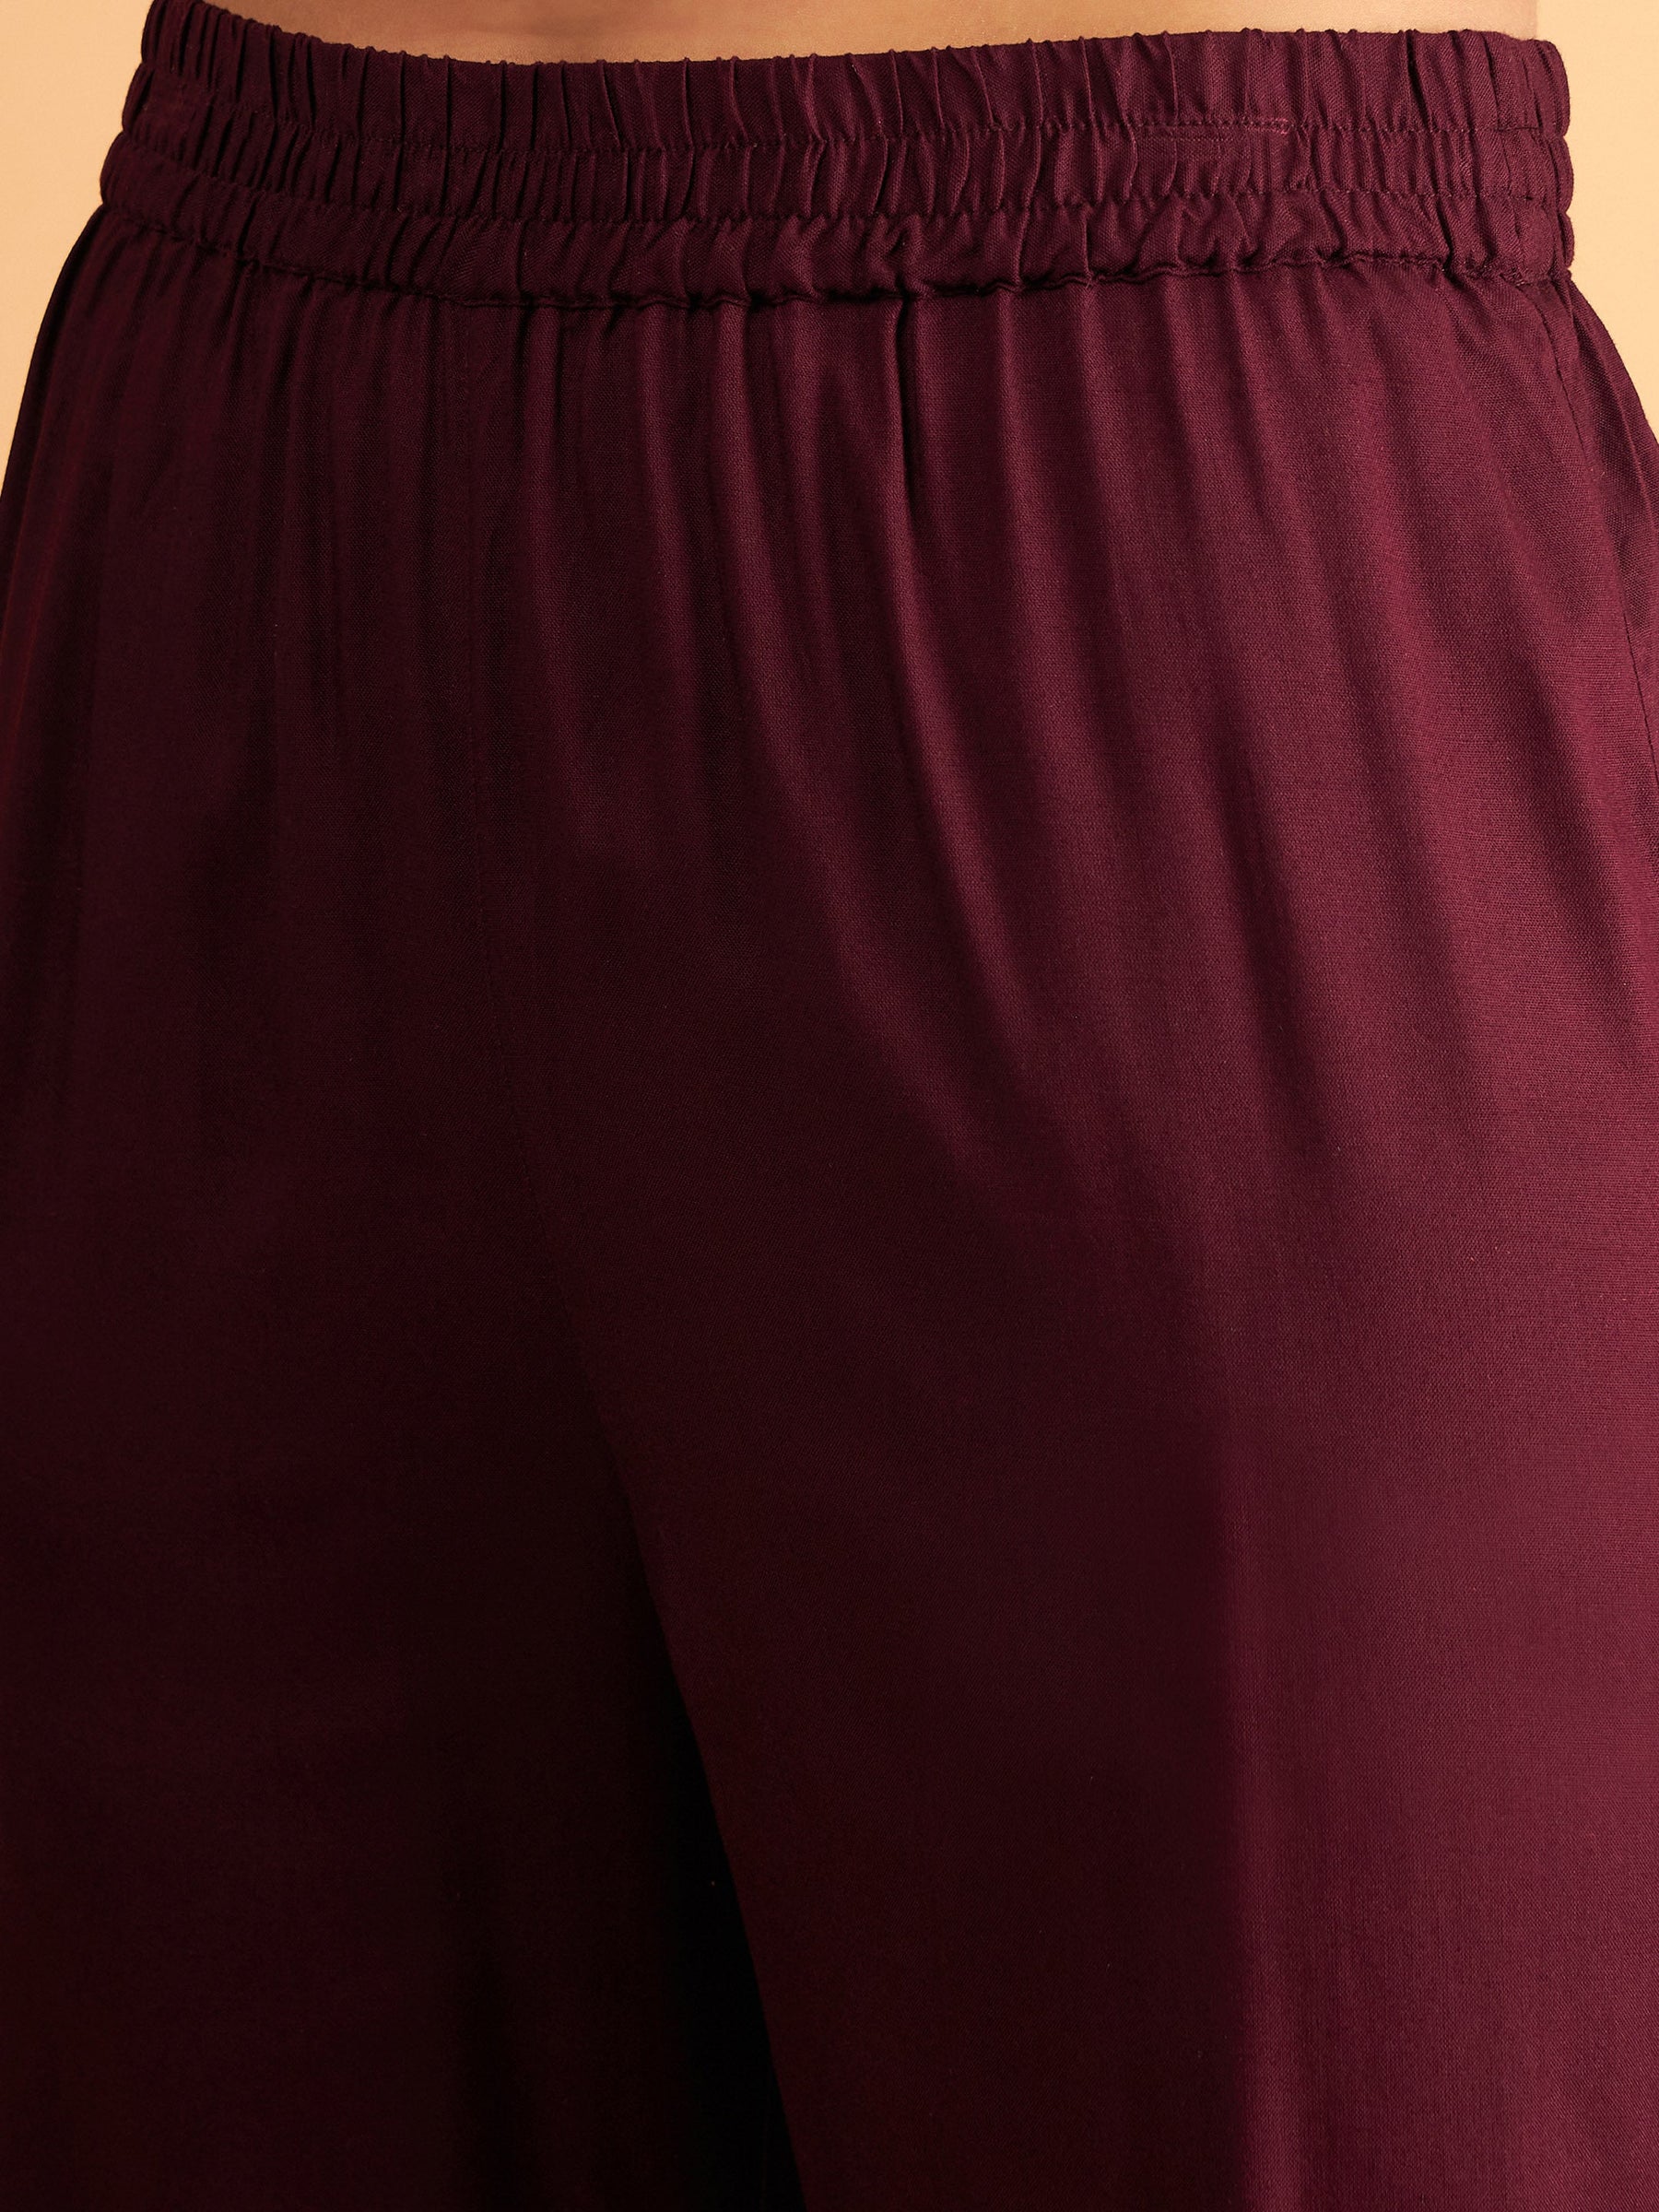 Burgundy Embroidered A Line Top With Pants-Shae by SASSAFRAS